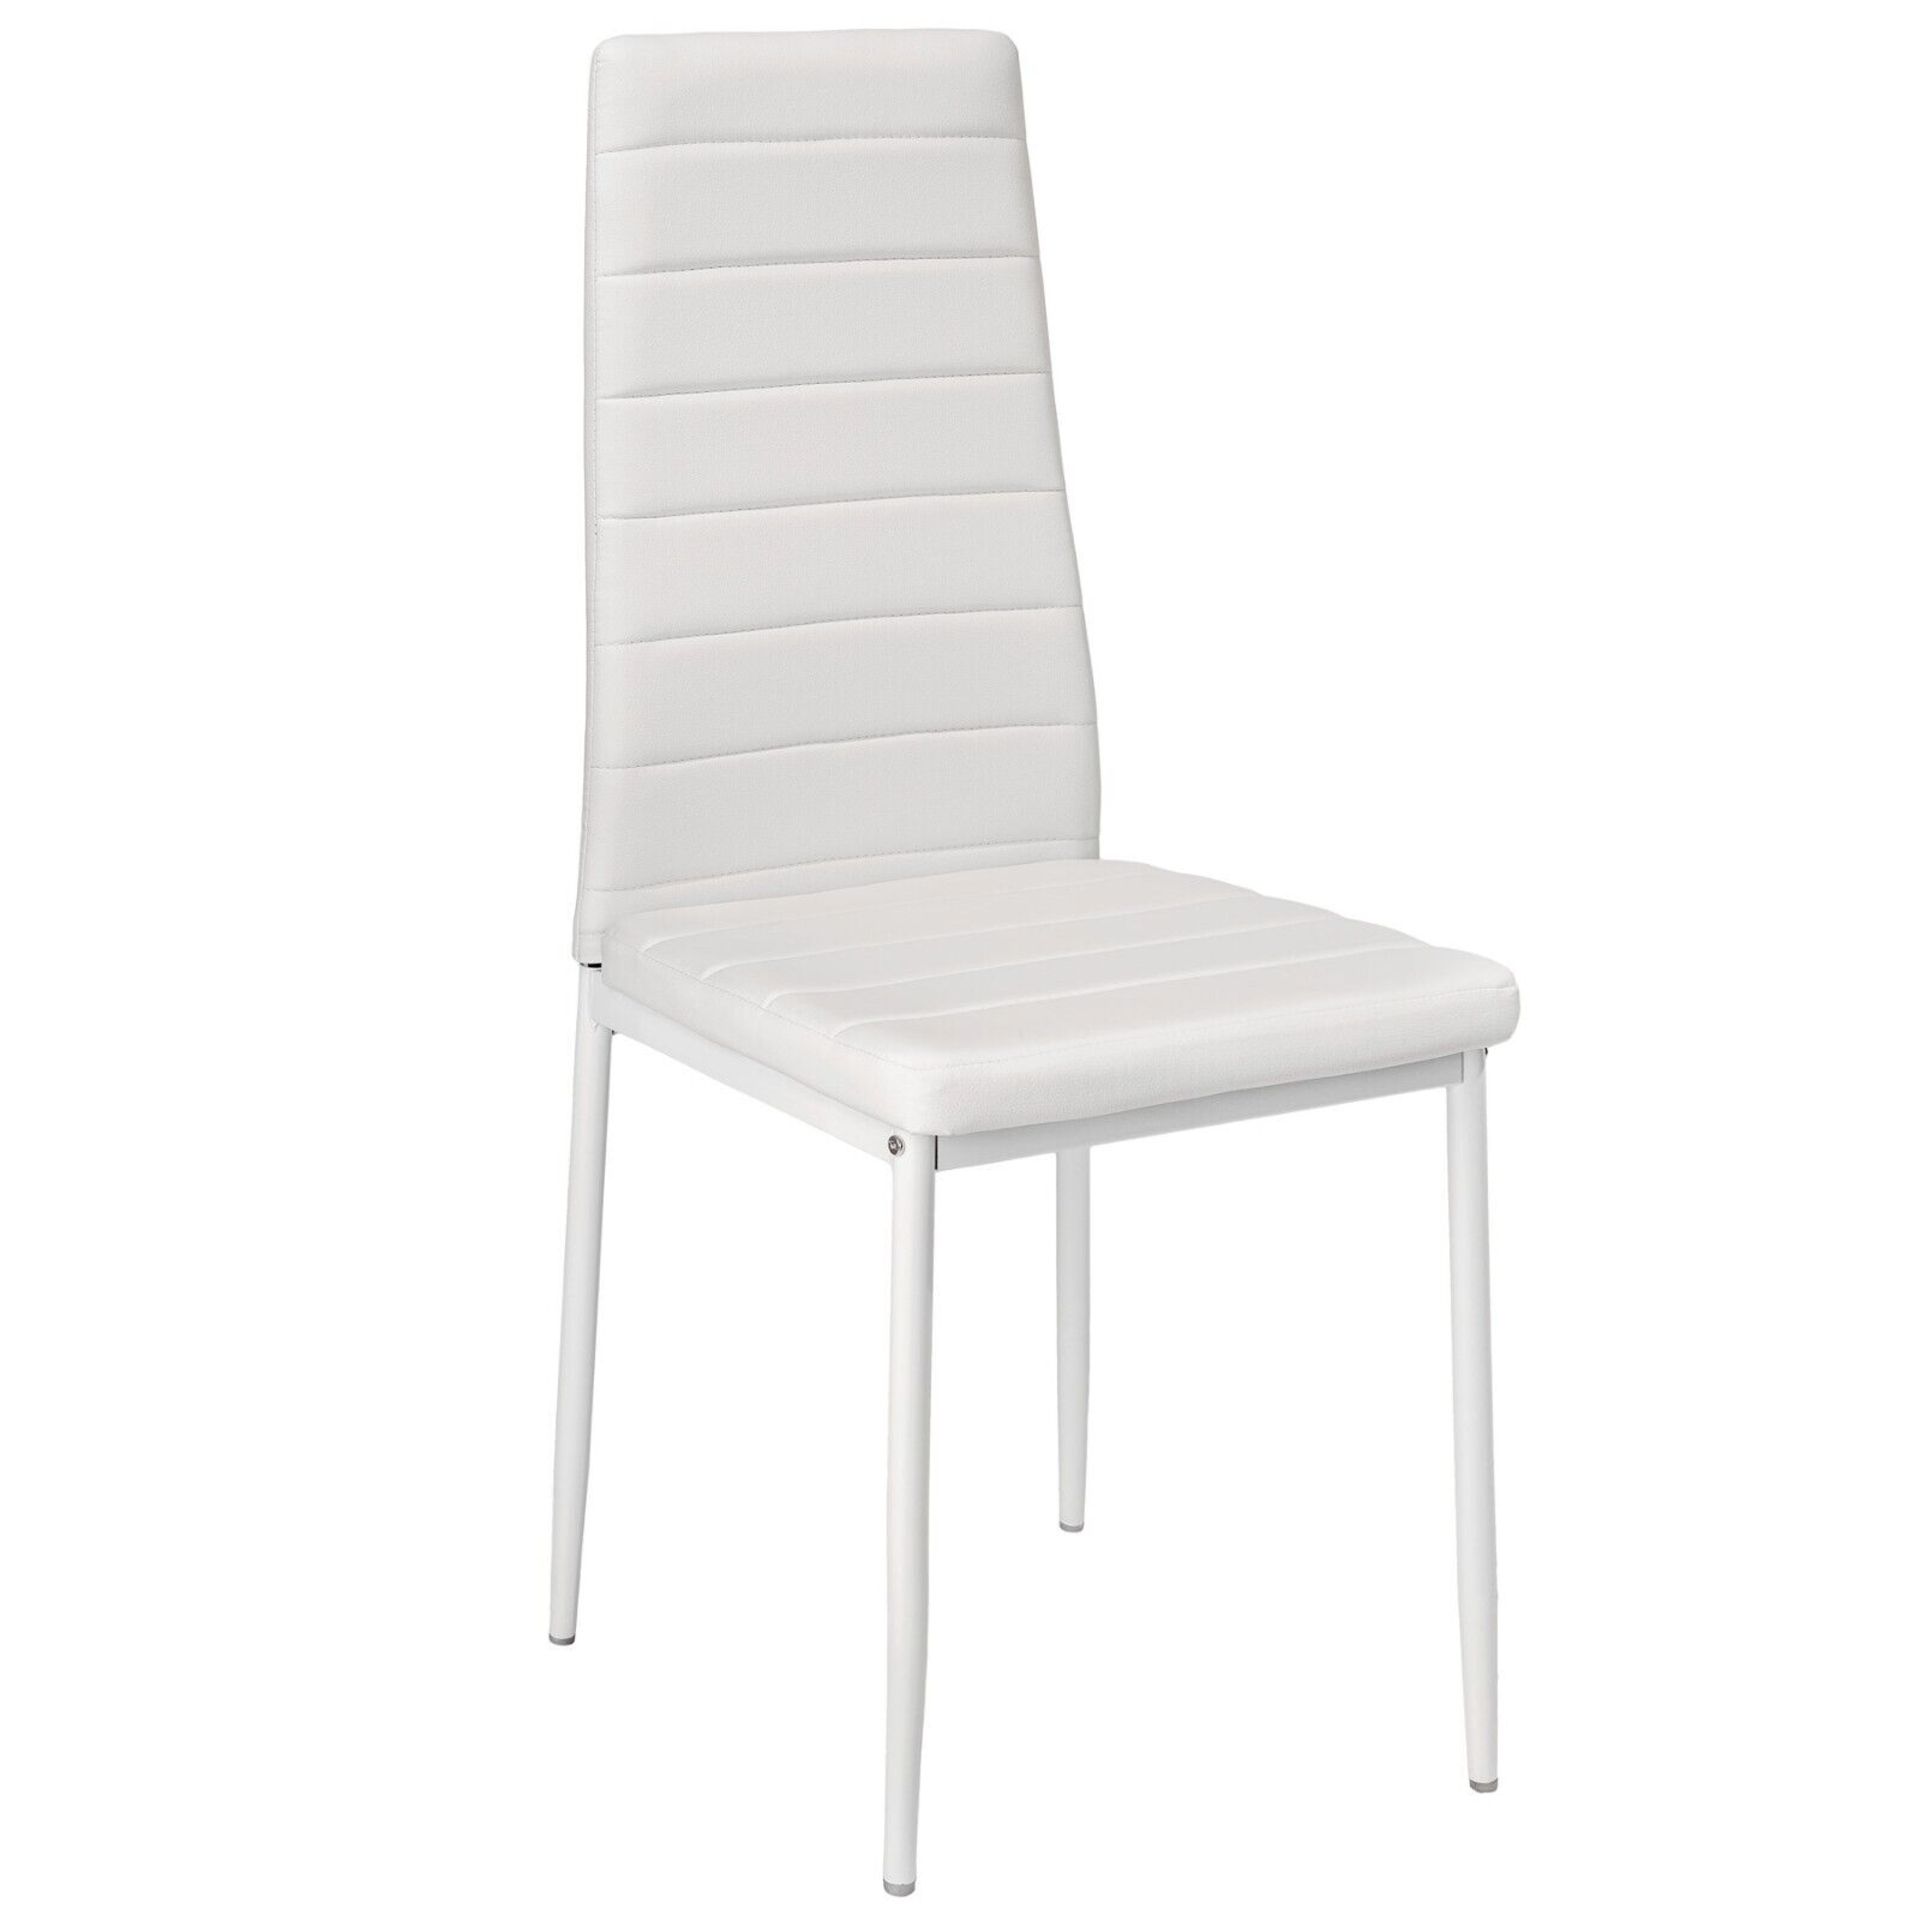 3 SETS OF 4 MODERN WHITE PU LEATHER DINING CHAIRS HIGH WHITE METAL LEGS PADDED SEAT RRP £299.97 - Bild 2 aus 3